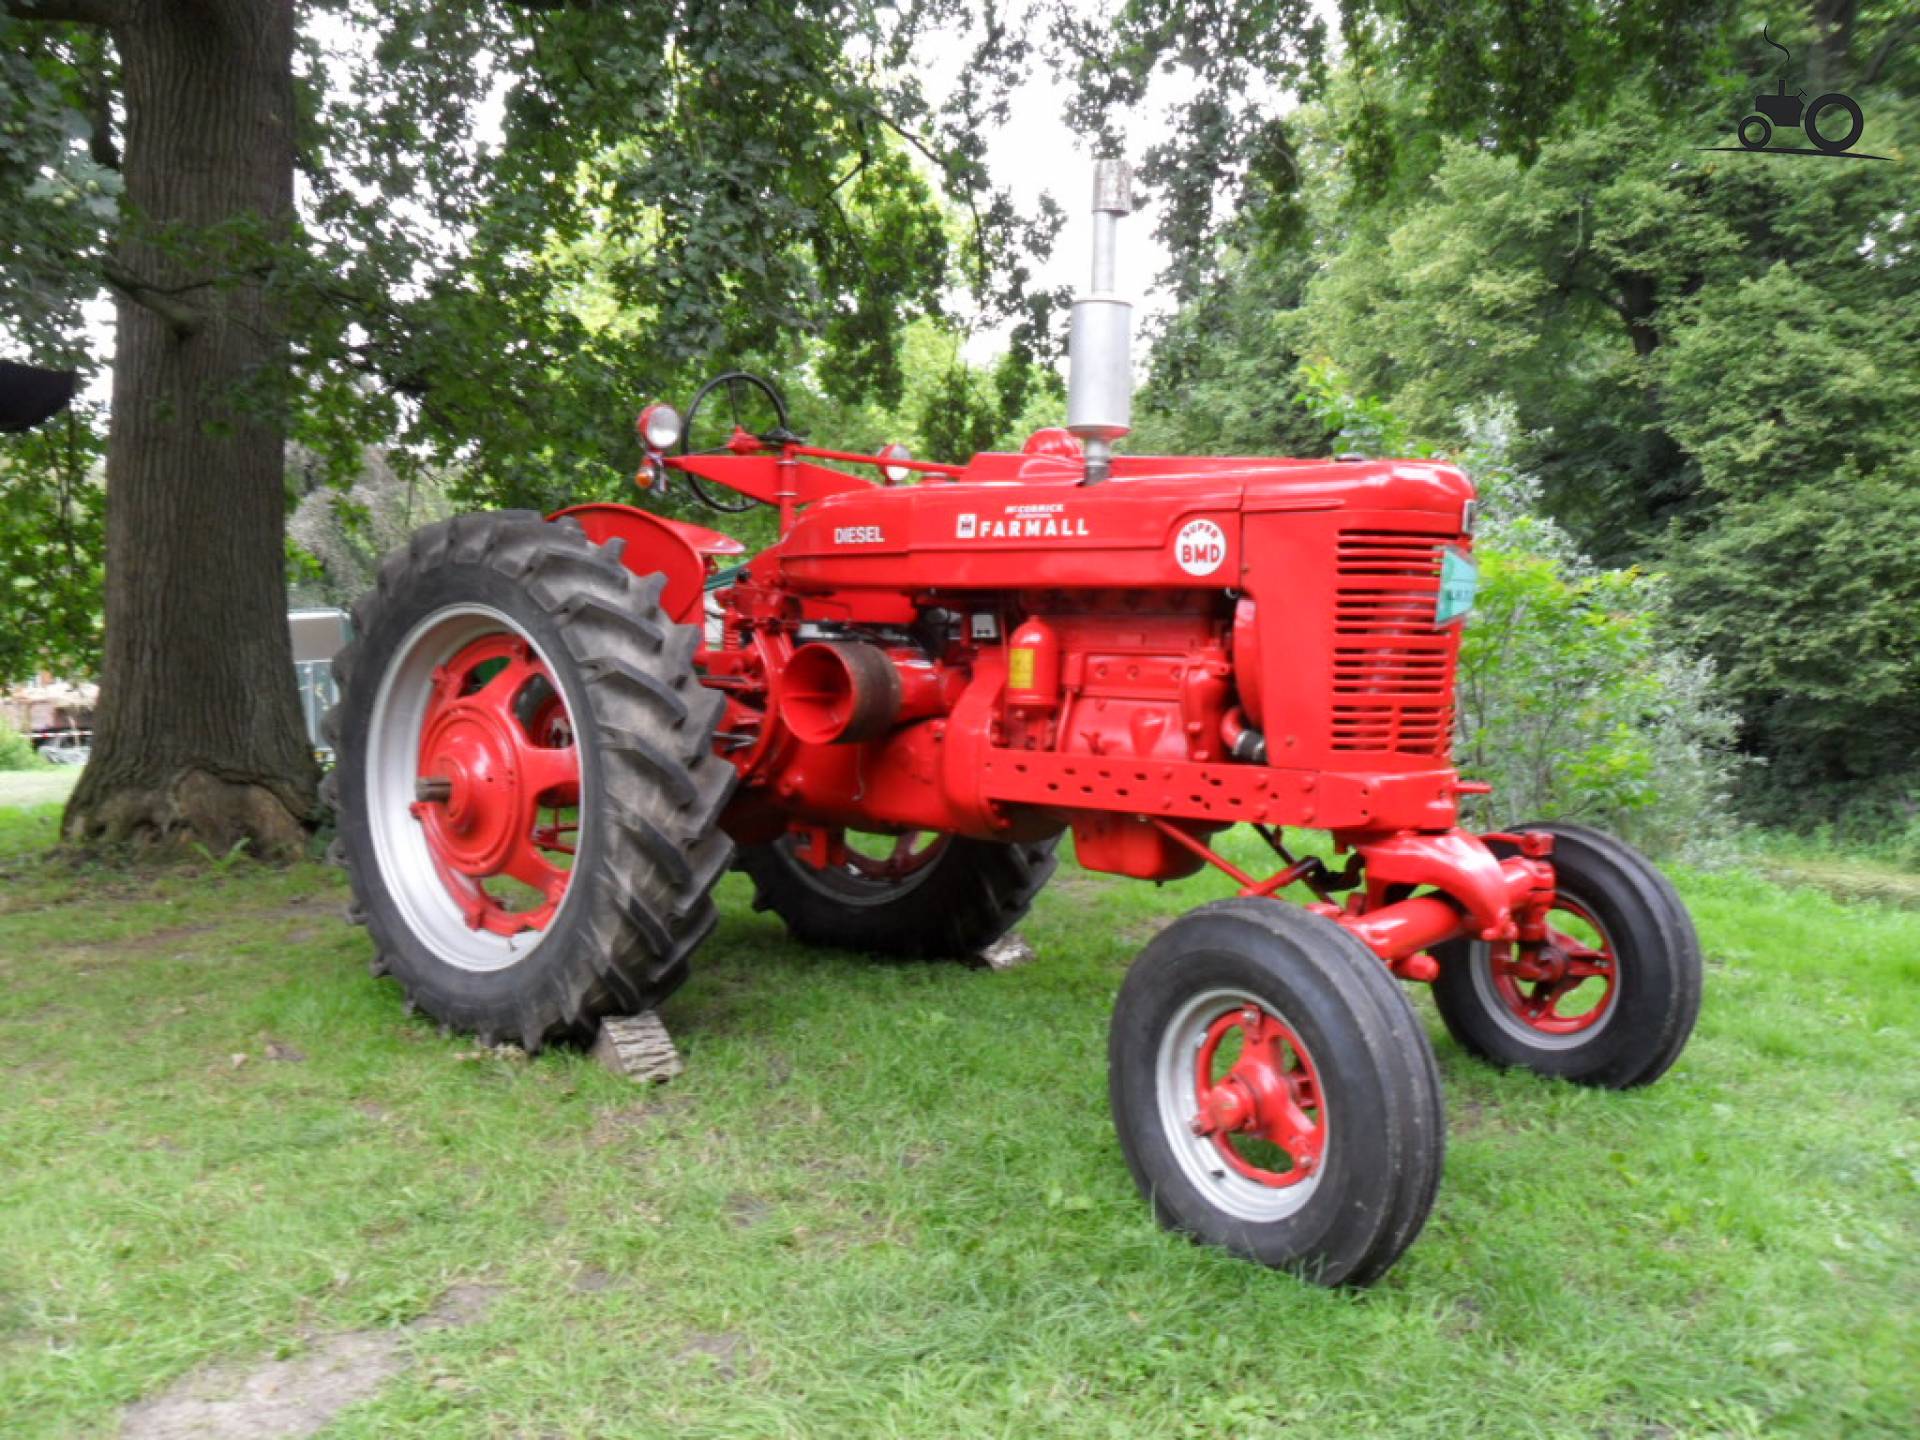 Farmall BMD Specs and data - Everything about the Farmall BMD